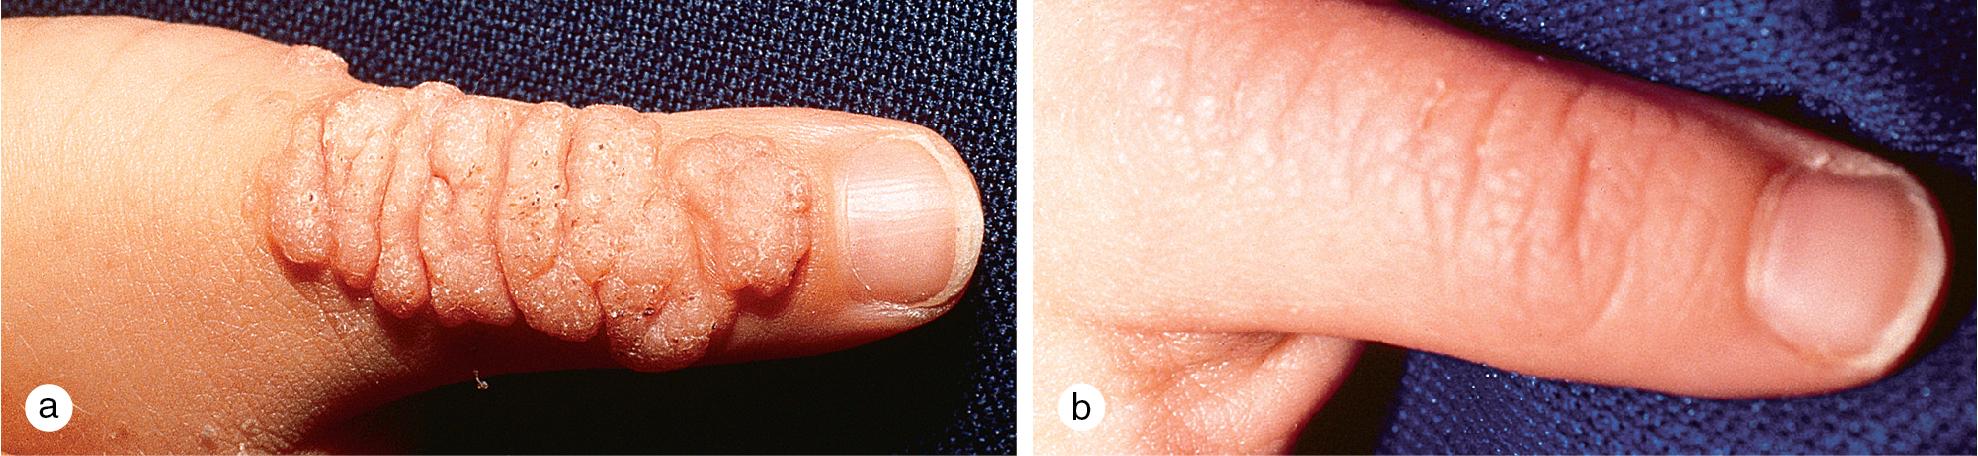 Fig. 5.1, Warts. (a) Multiple common warts grew to confluence on the thumb of a 4-year-old boy. (b) Shortly before surgery was scheduled, the warts began to regress without treatment.